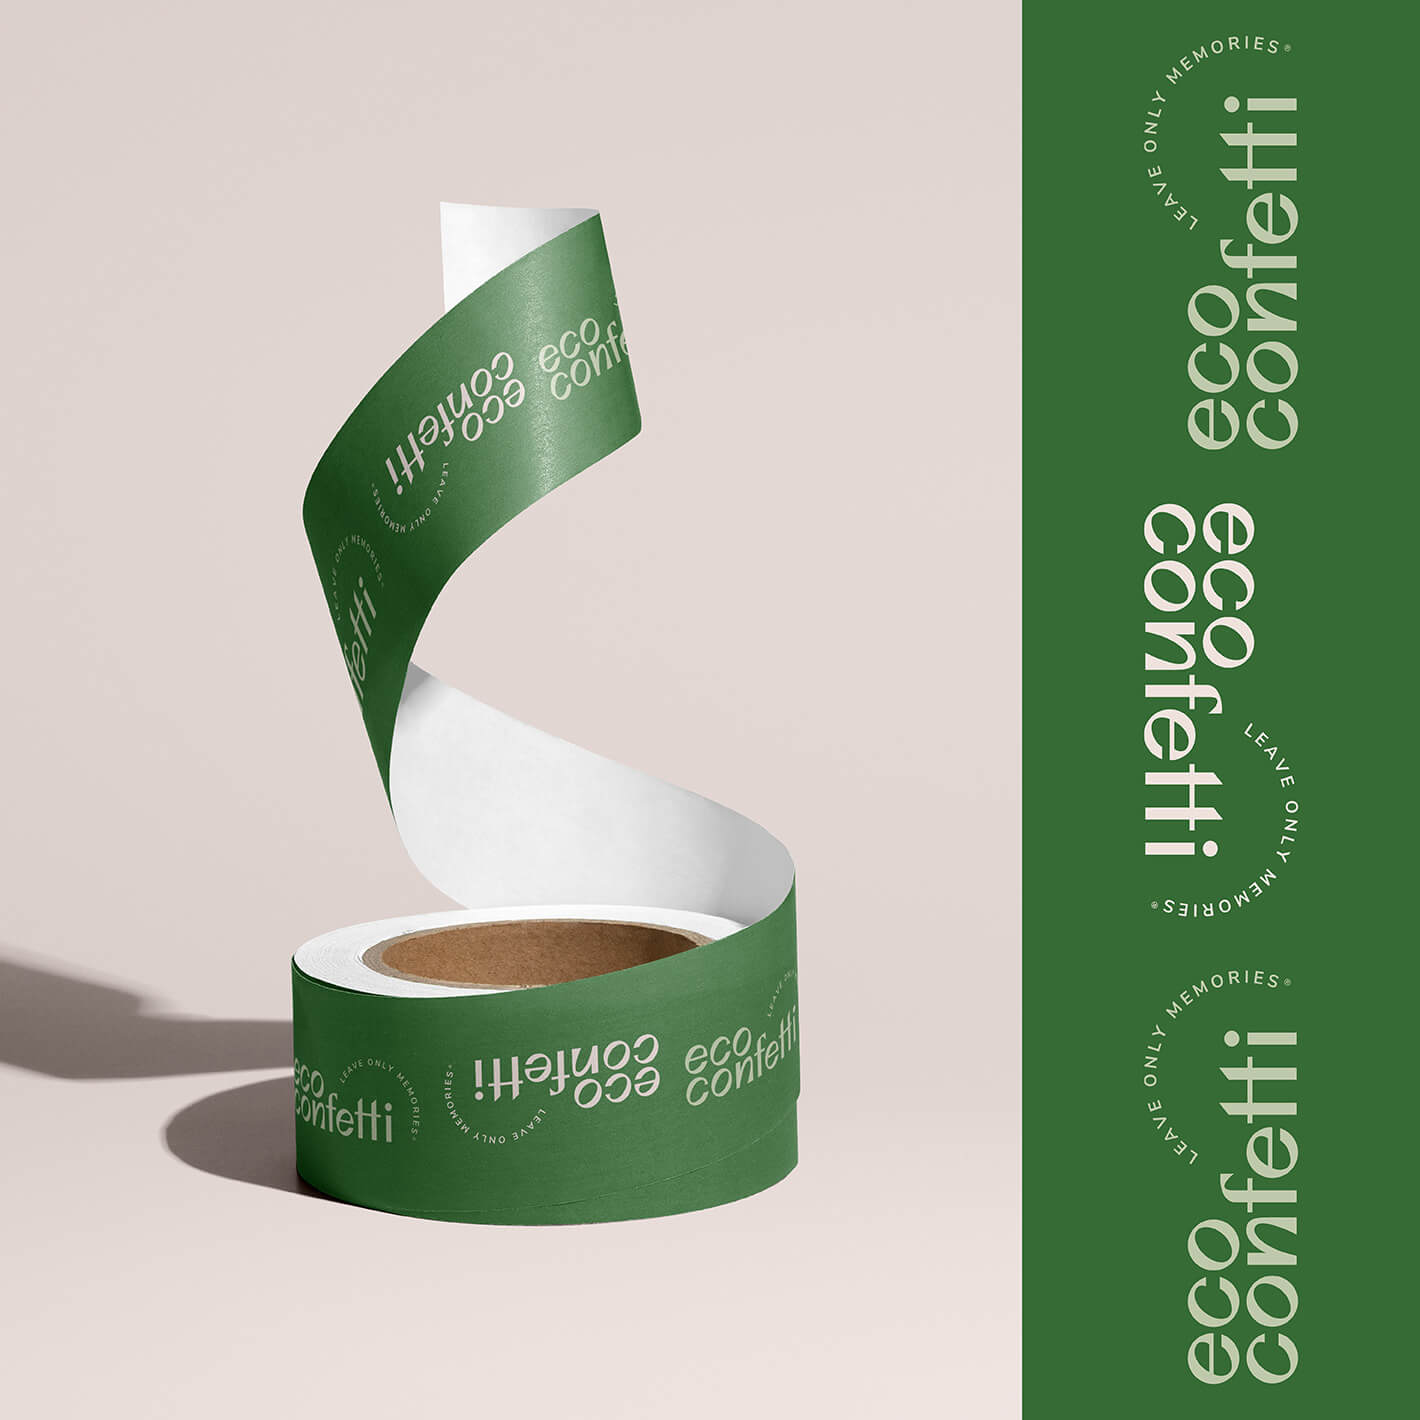 Brand identity case study image showcasing the Eco Confetti custom tape design. On a rich green background, the brand logo sits in alternating cream and light green.